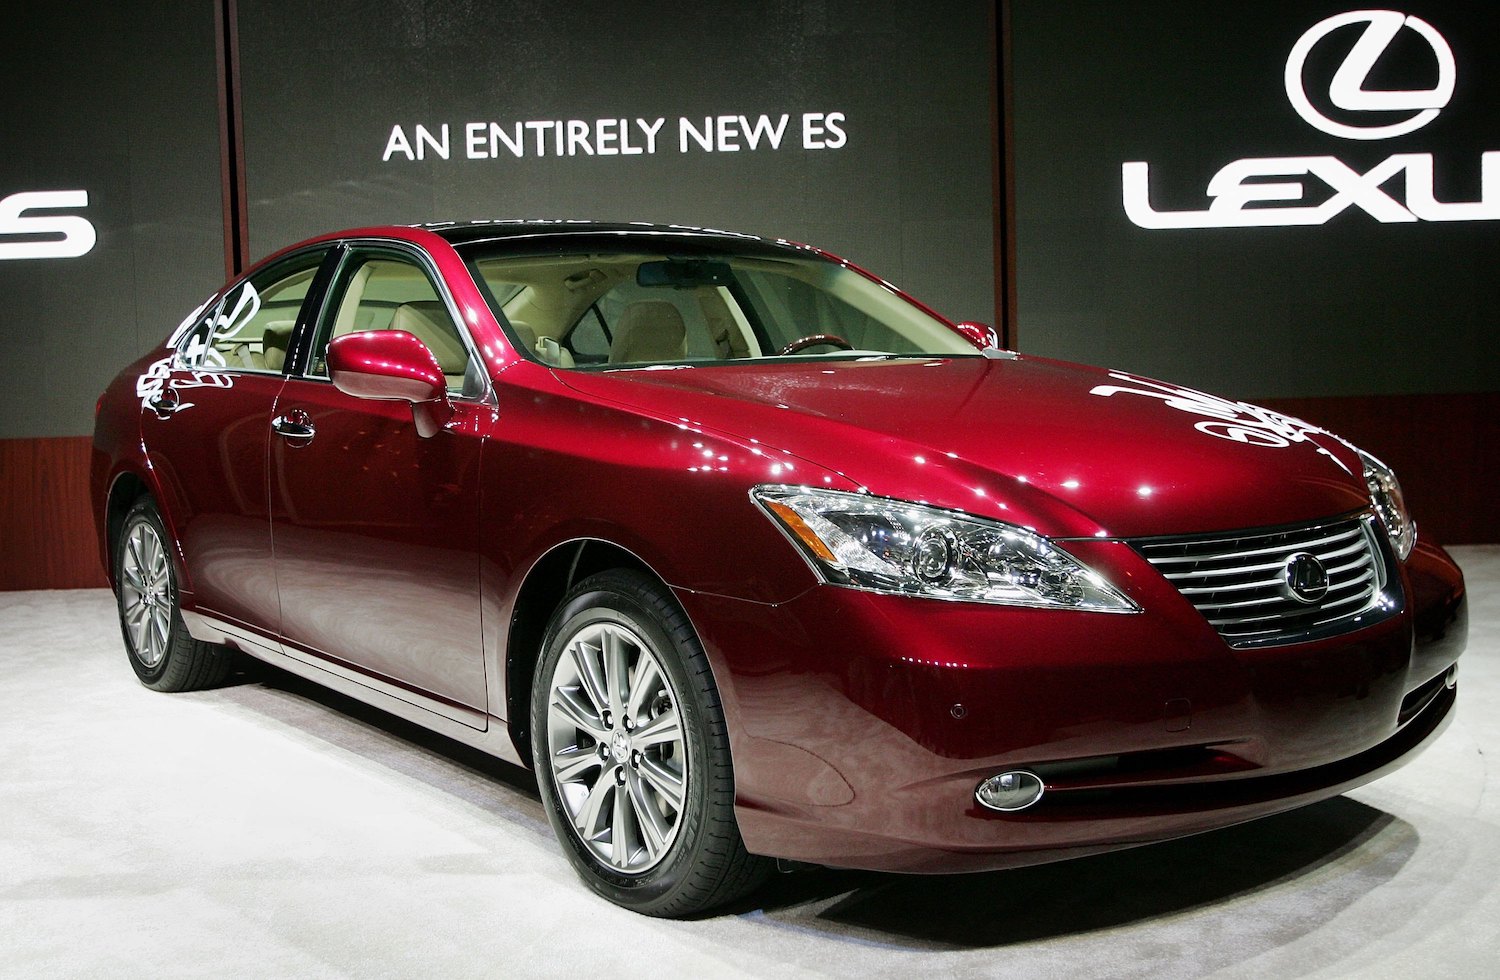 A Red 2007 Lexus ES350 luxury car on stage debuting at the Chicago auto show.